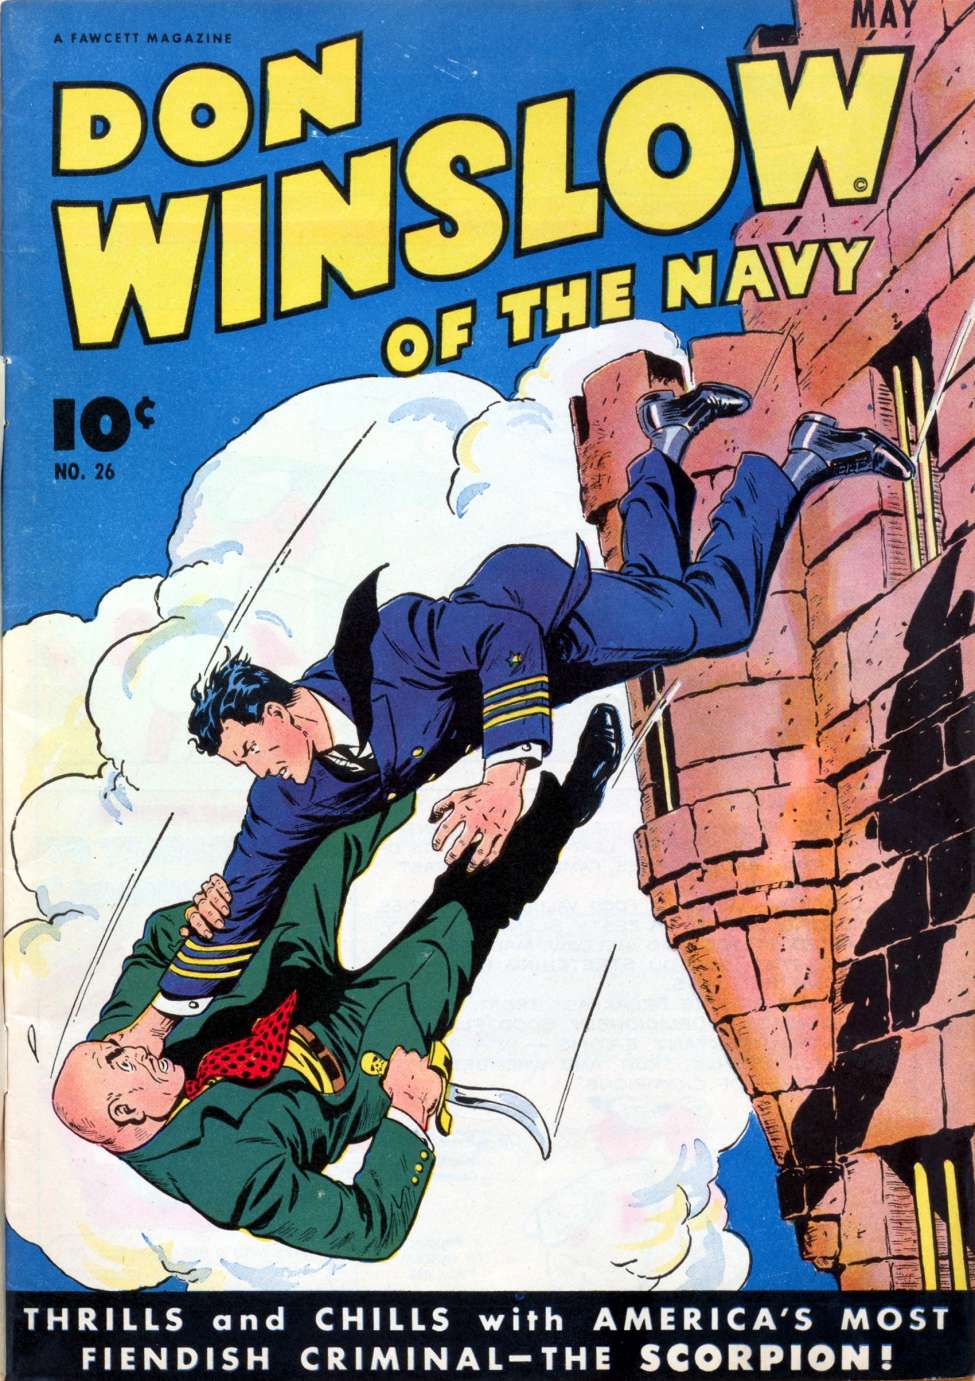 Book Cover For Don Winslow of the Navy 26